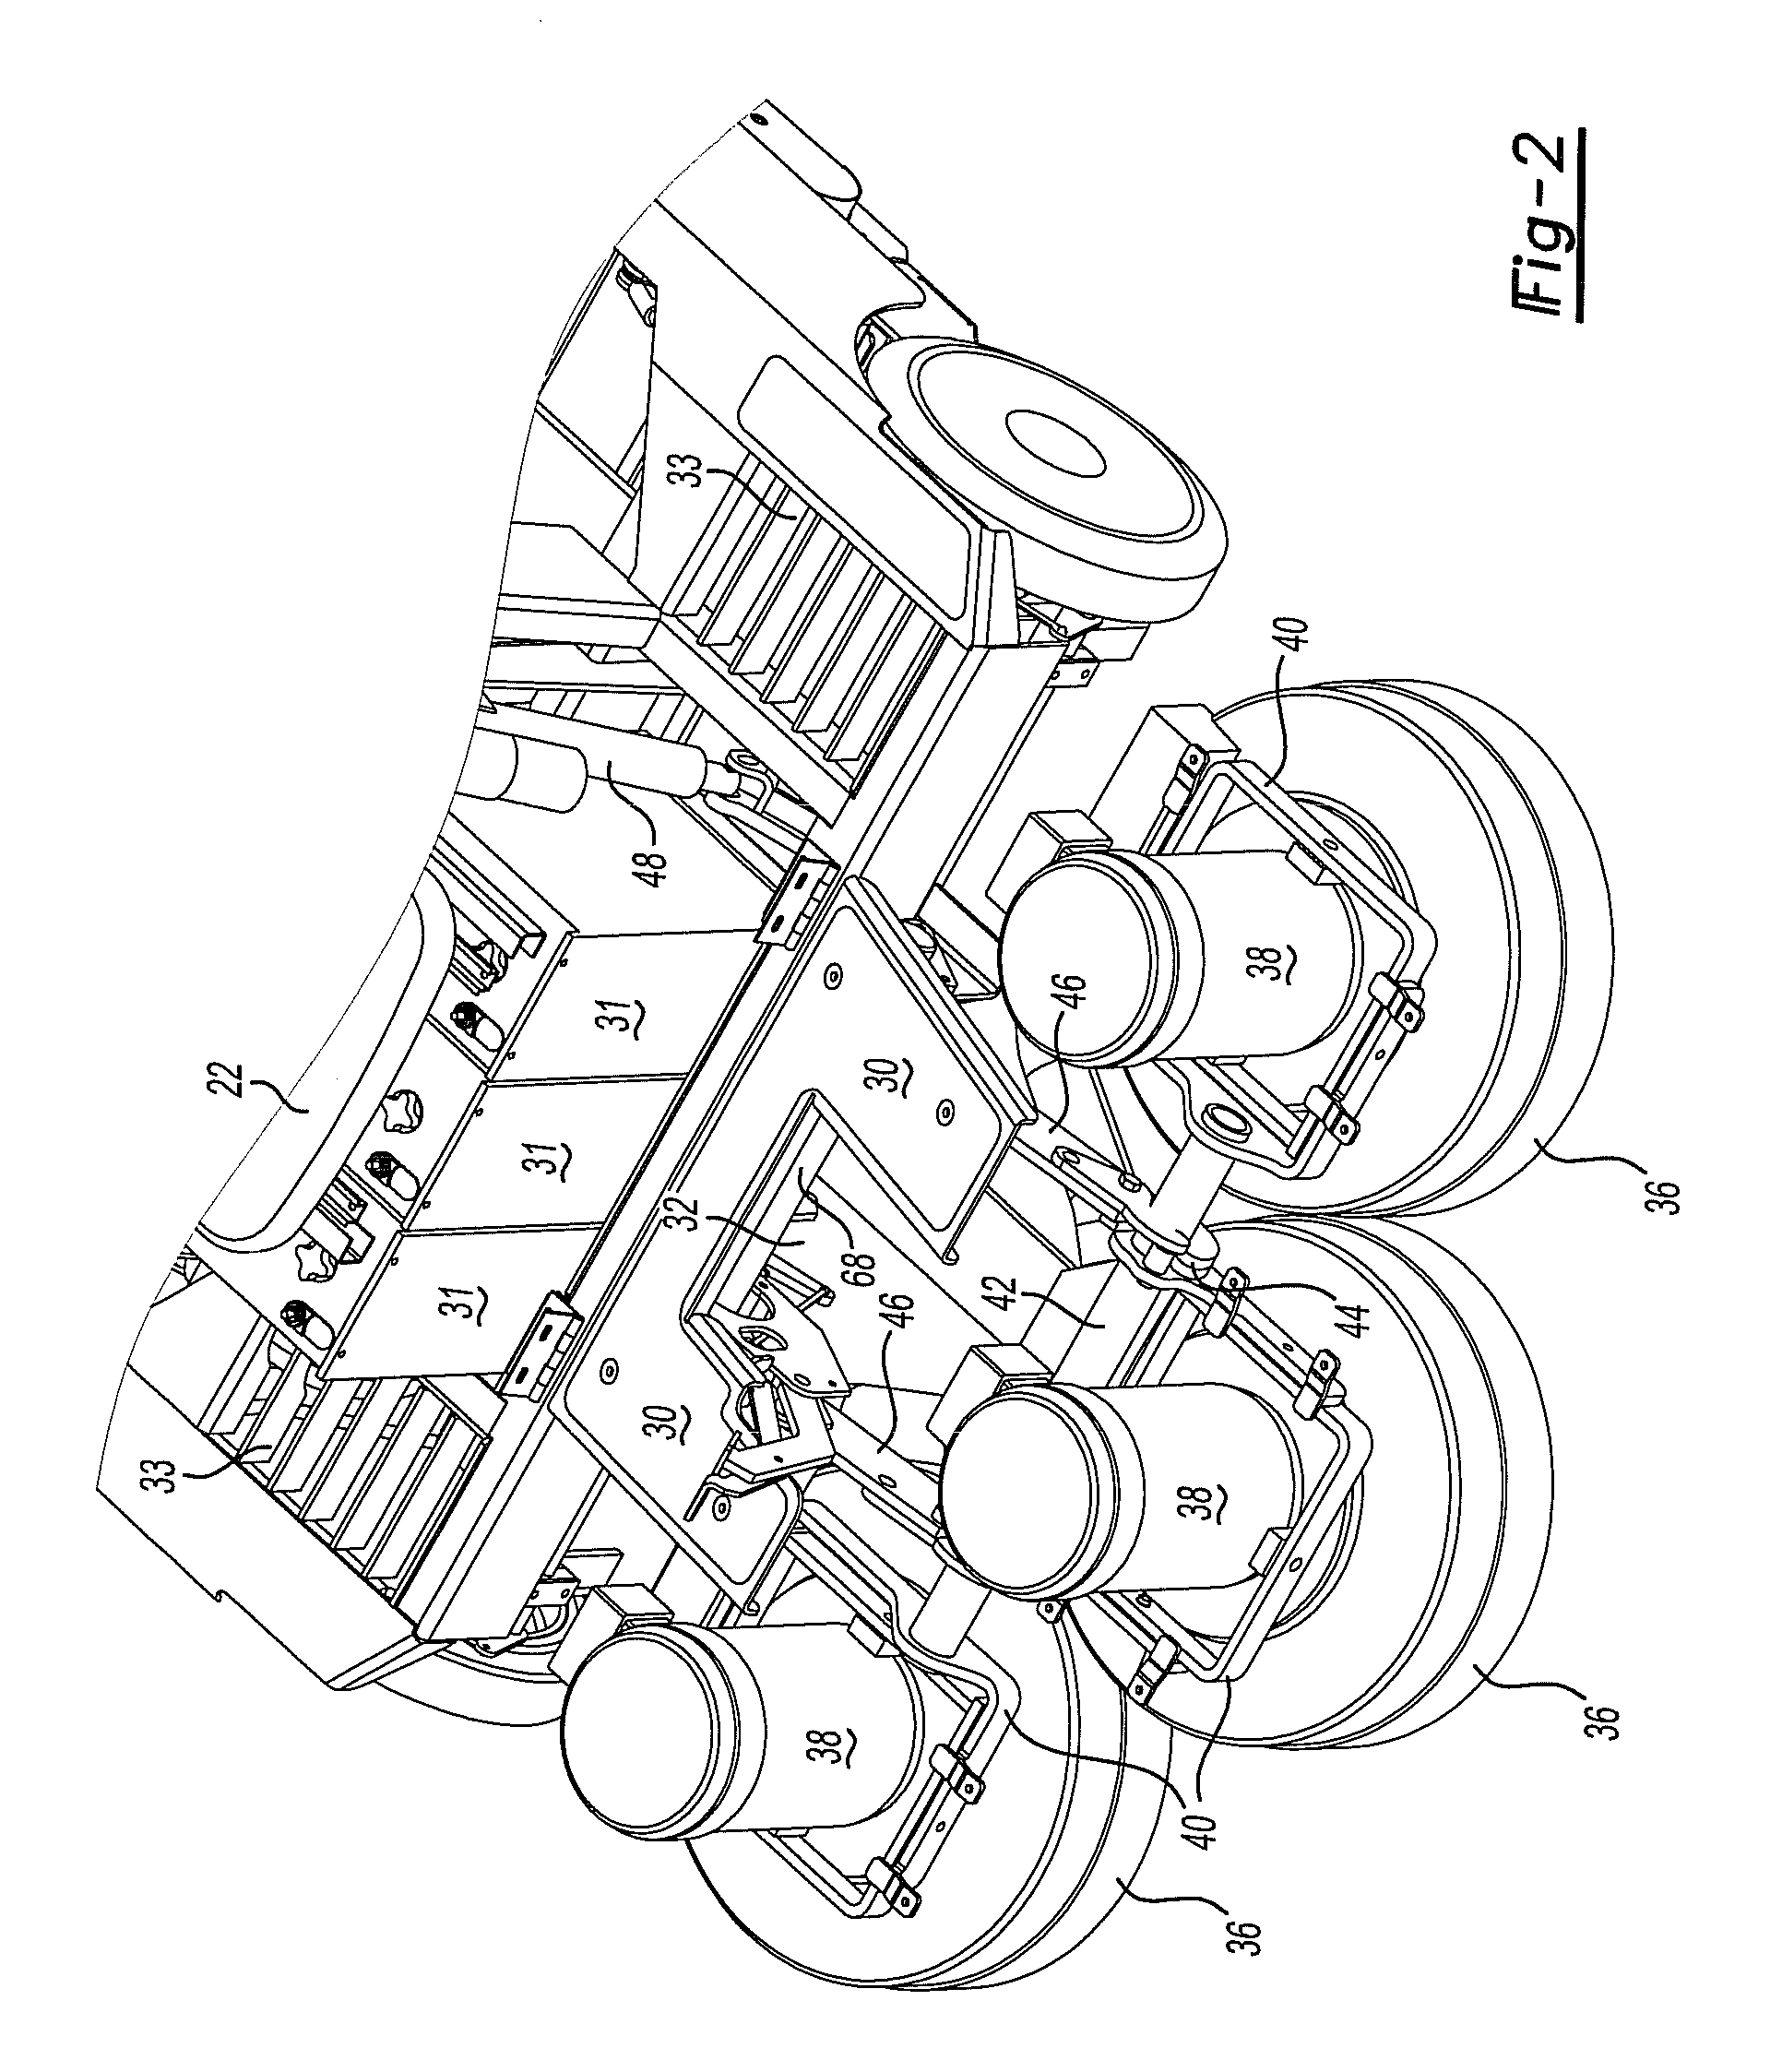 Riding apparatus for treating floor surfaces with a power cord handling swing arm